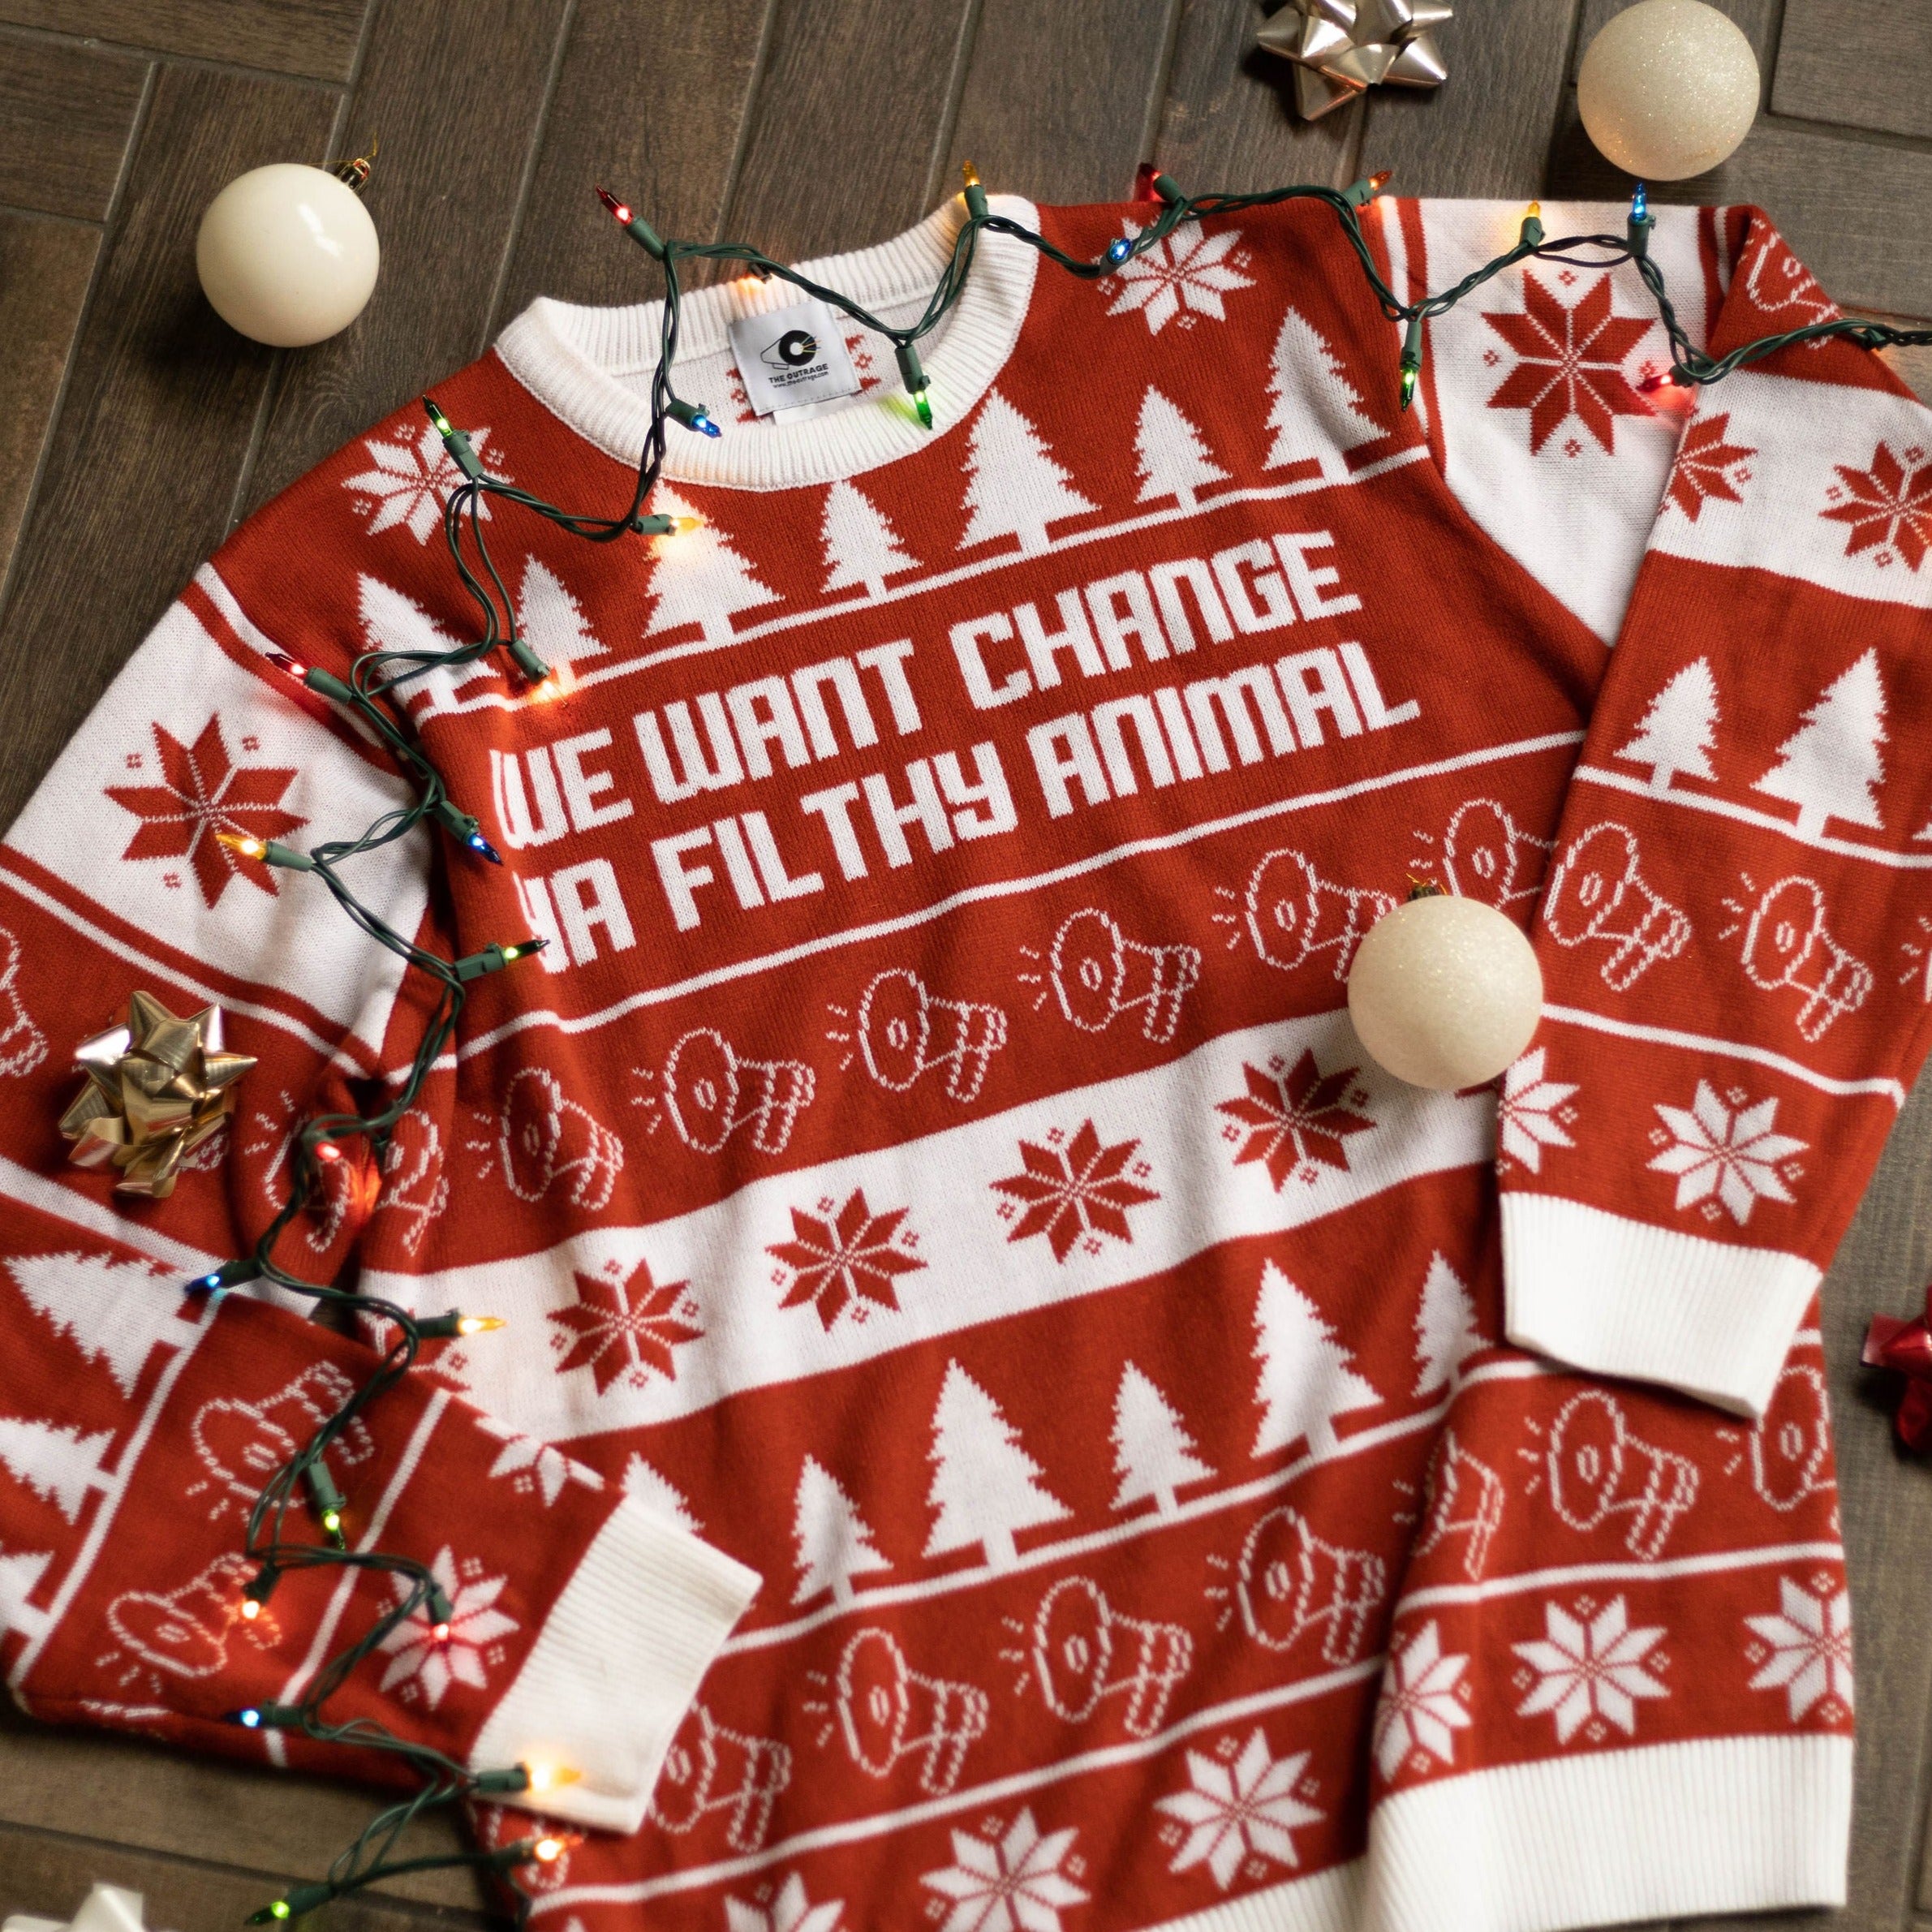 A flat lay of the We Want Change Holiday Sweater. There are colorful holiday lights, ornaments, and bows around it.